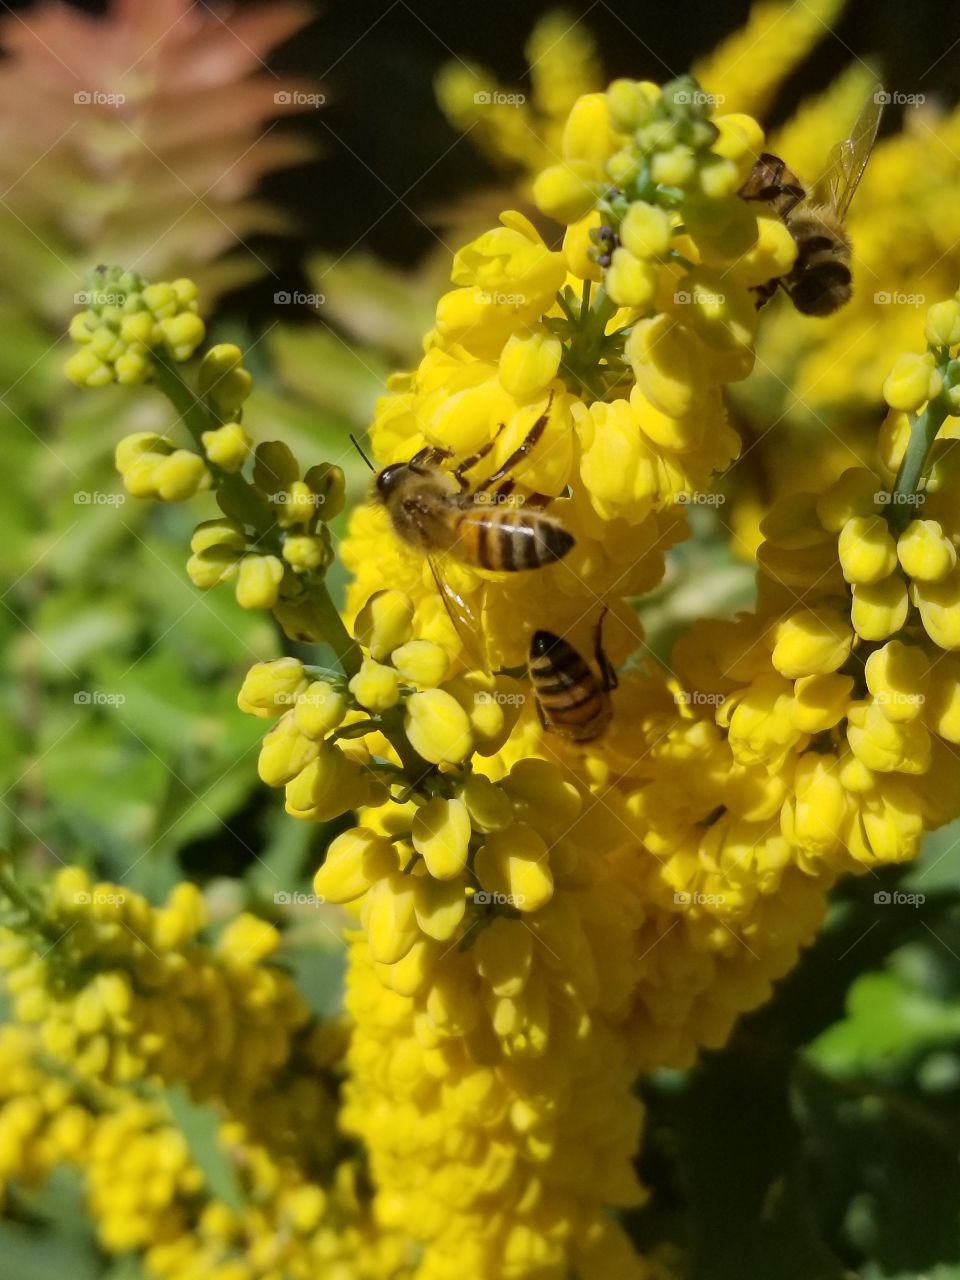 Beautiful yellow flowers with bees.